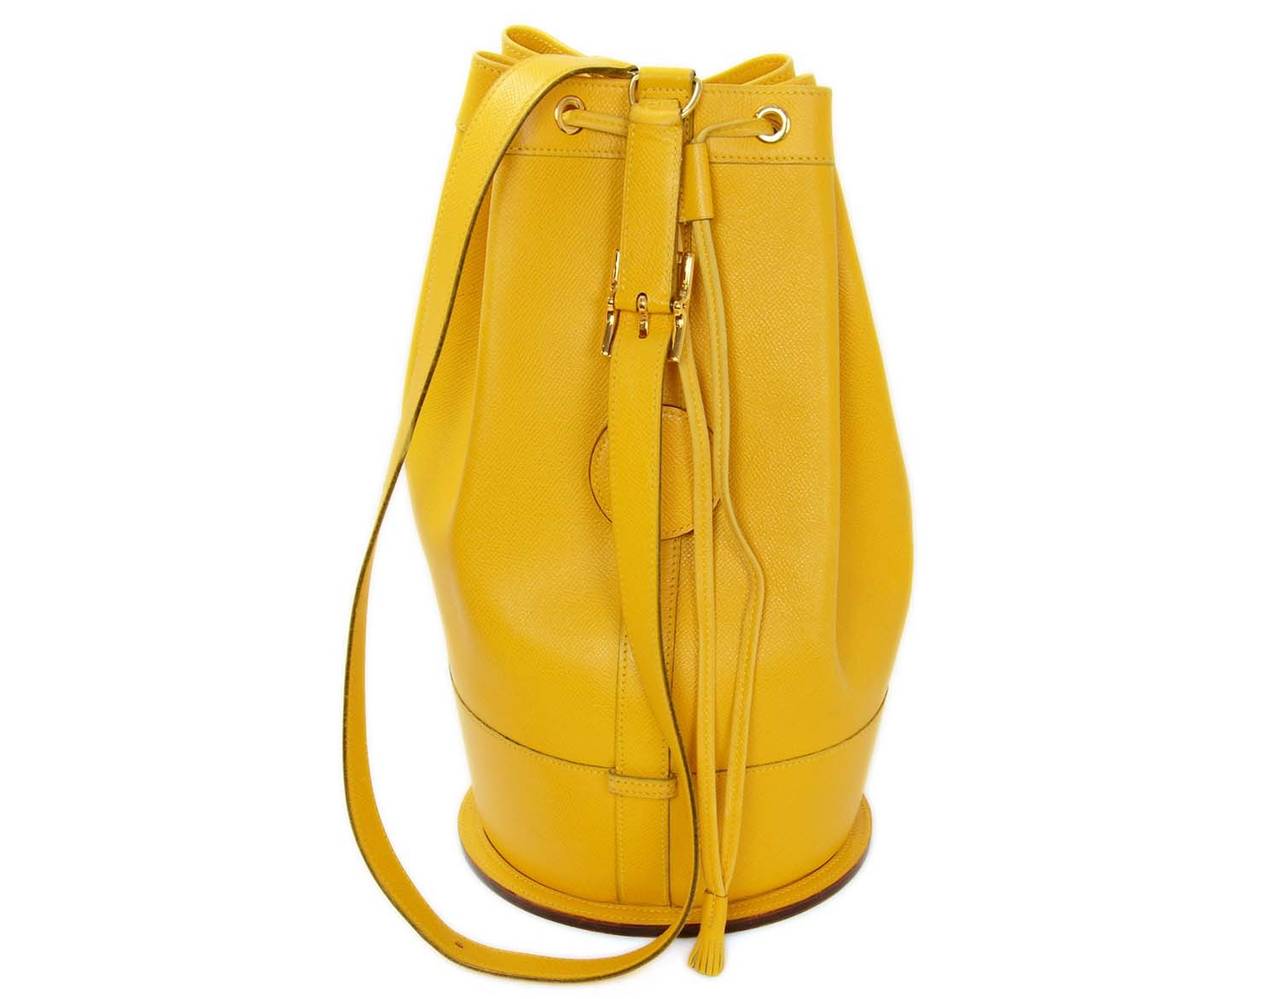 Hermes Vintage Yellow Epsom Leather Sling Bag Yellow Epsom Leather Sling Bag
This Vintage HERMES leather sling bag is made in a beautiful yellow epsom leather with goldtone hardware. Circular base with 